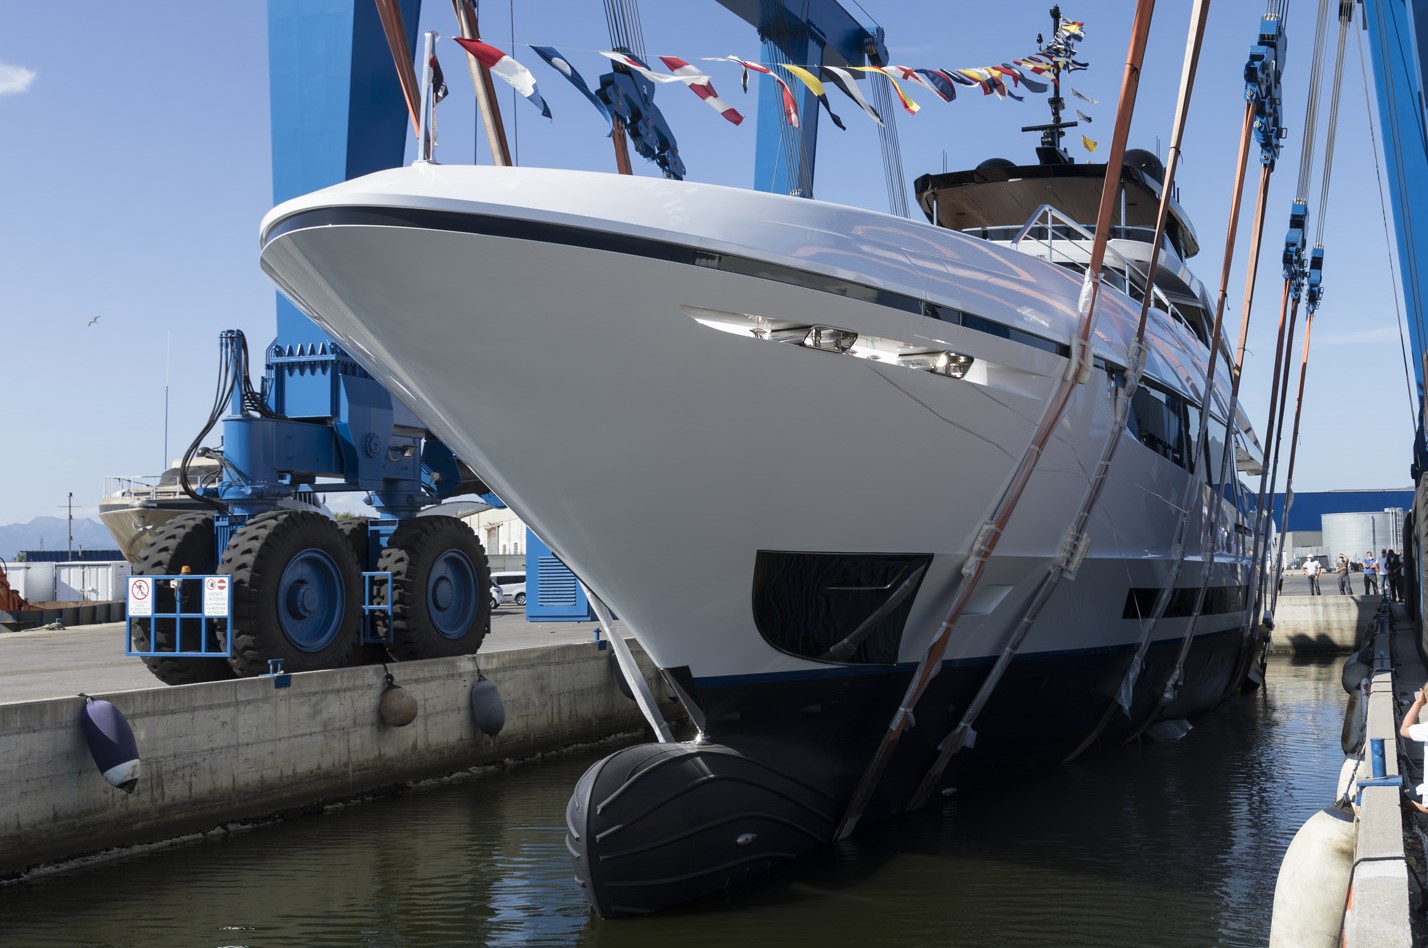 Luxury yacht COMO - a Mangusta 43 Oceano by Overmarine Group launched onto the water